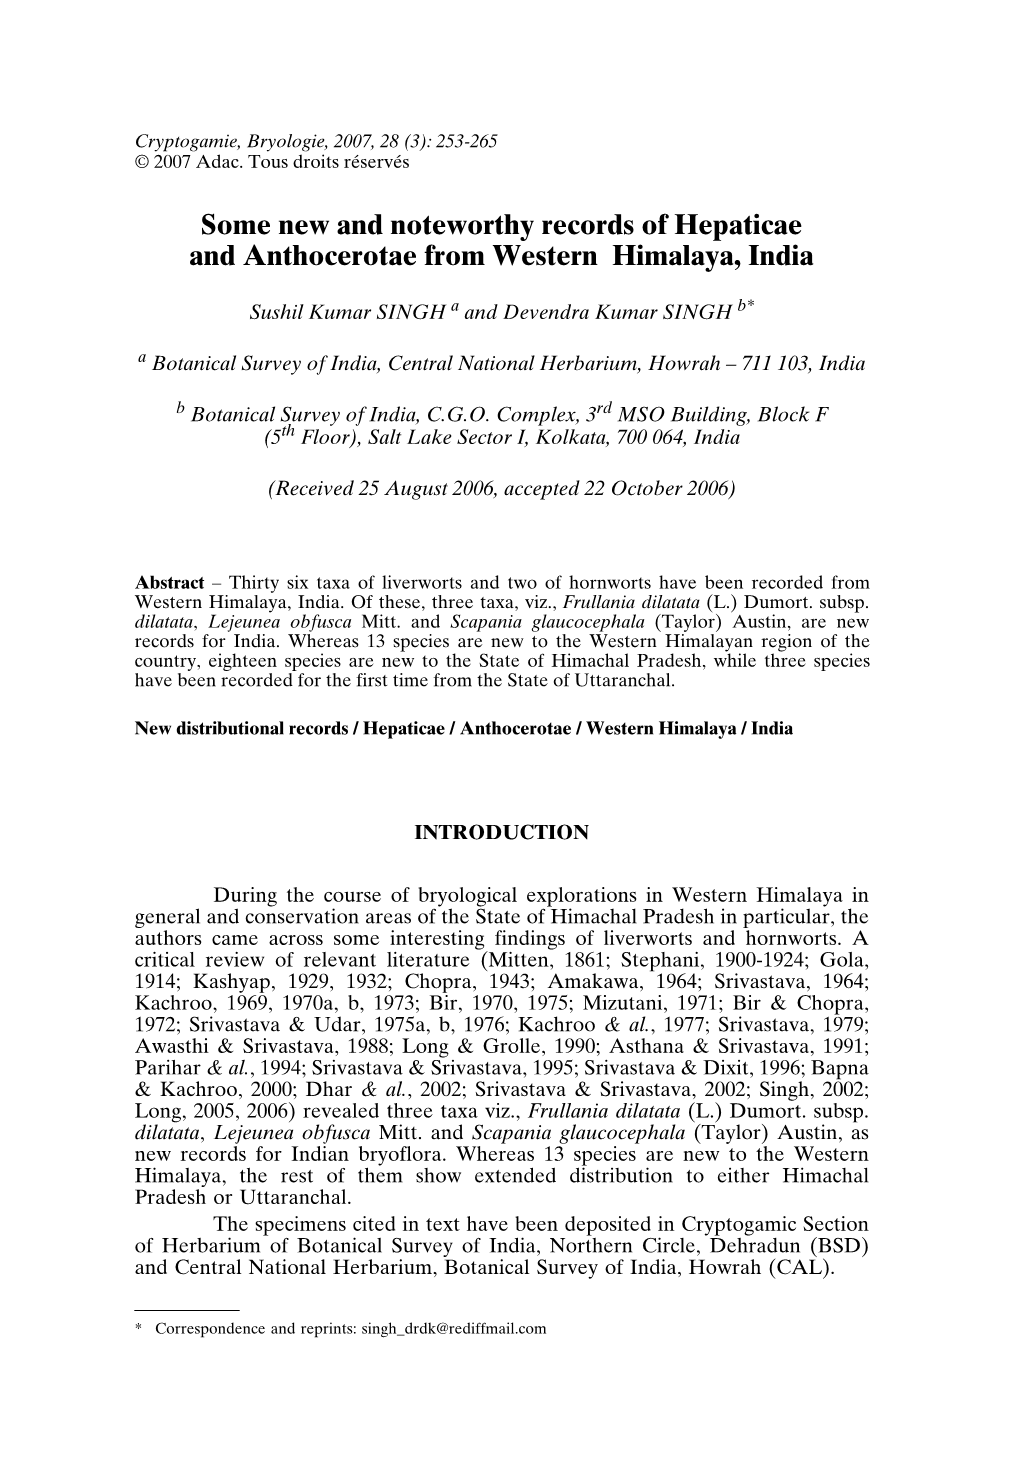 Some New and Noteworthy Records of Hepaticae and Anthocerotae from Western Himalaya, India